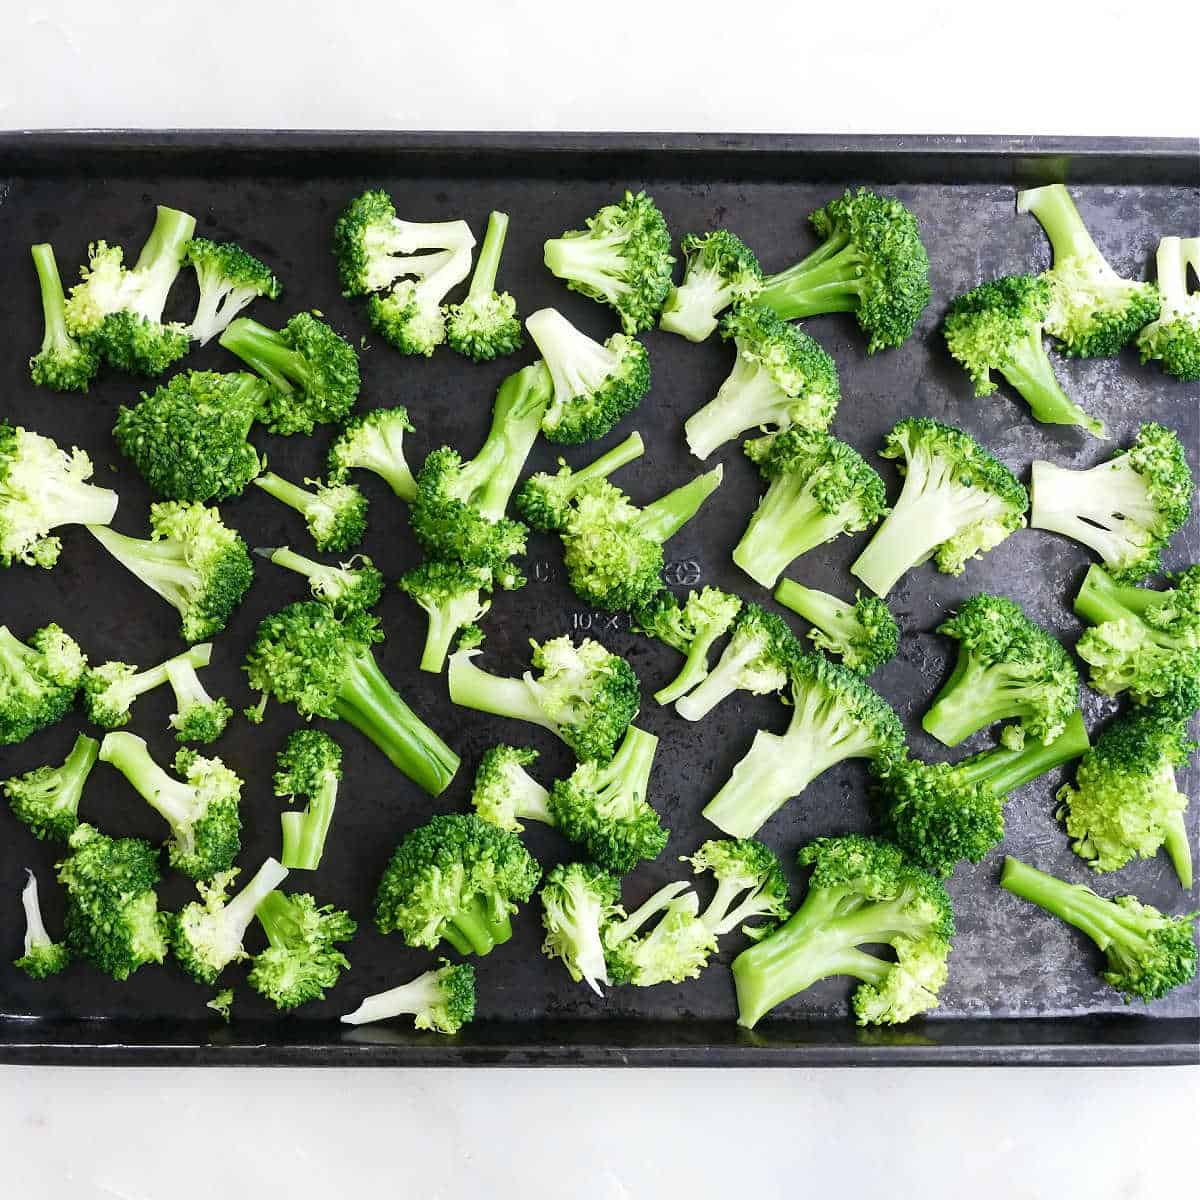 blanched broccoli spread out on a baking sheet on a counter